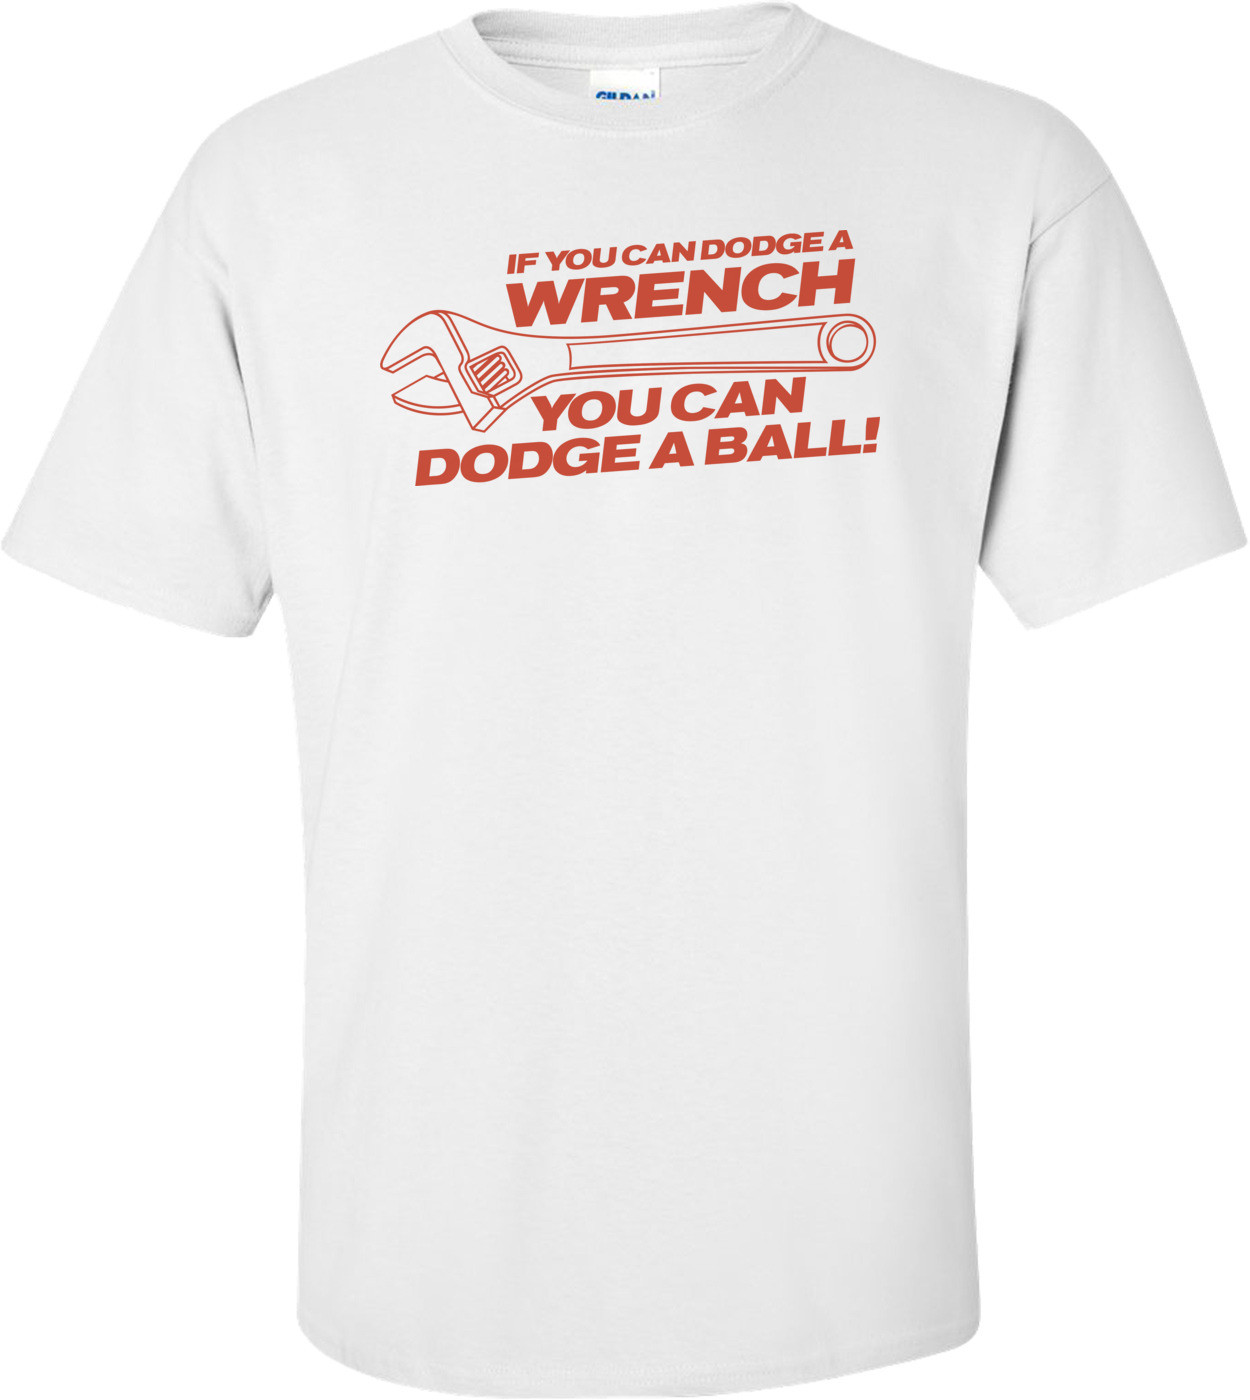 If You Can Dodge A Wrench You Can Dodge A Ball